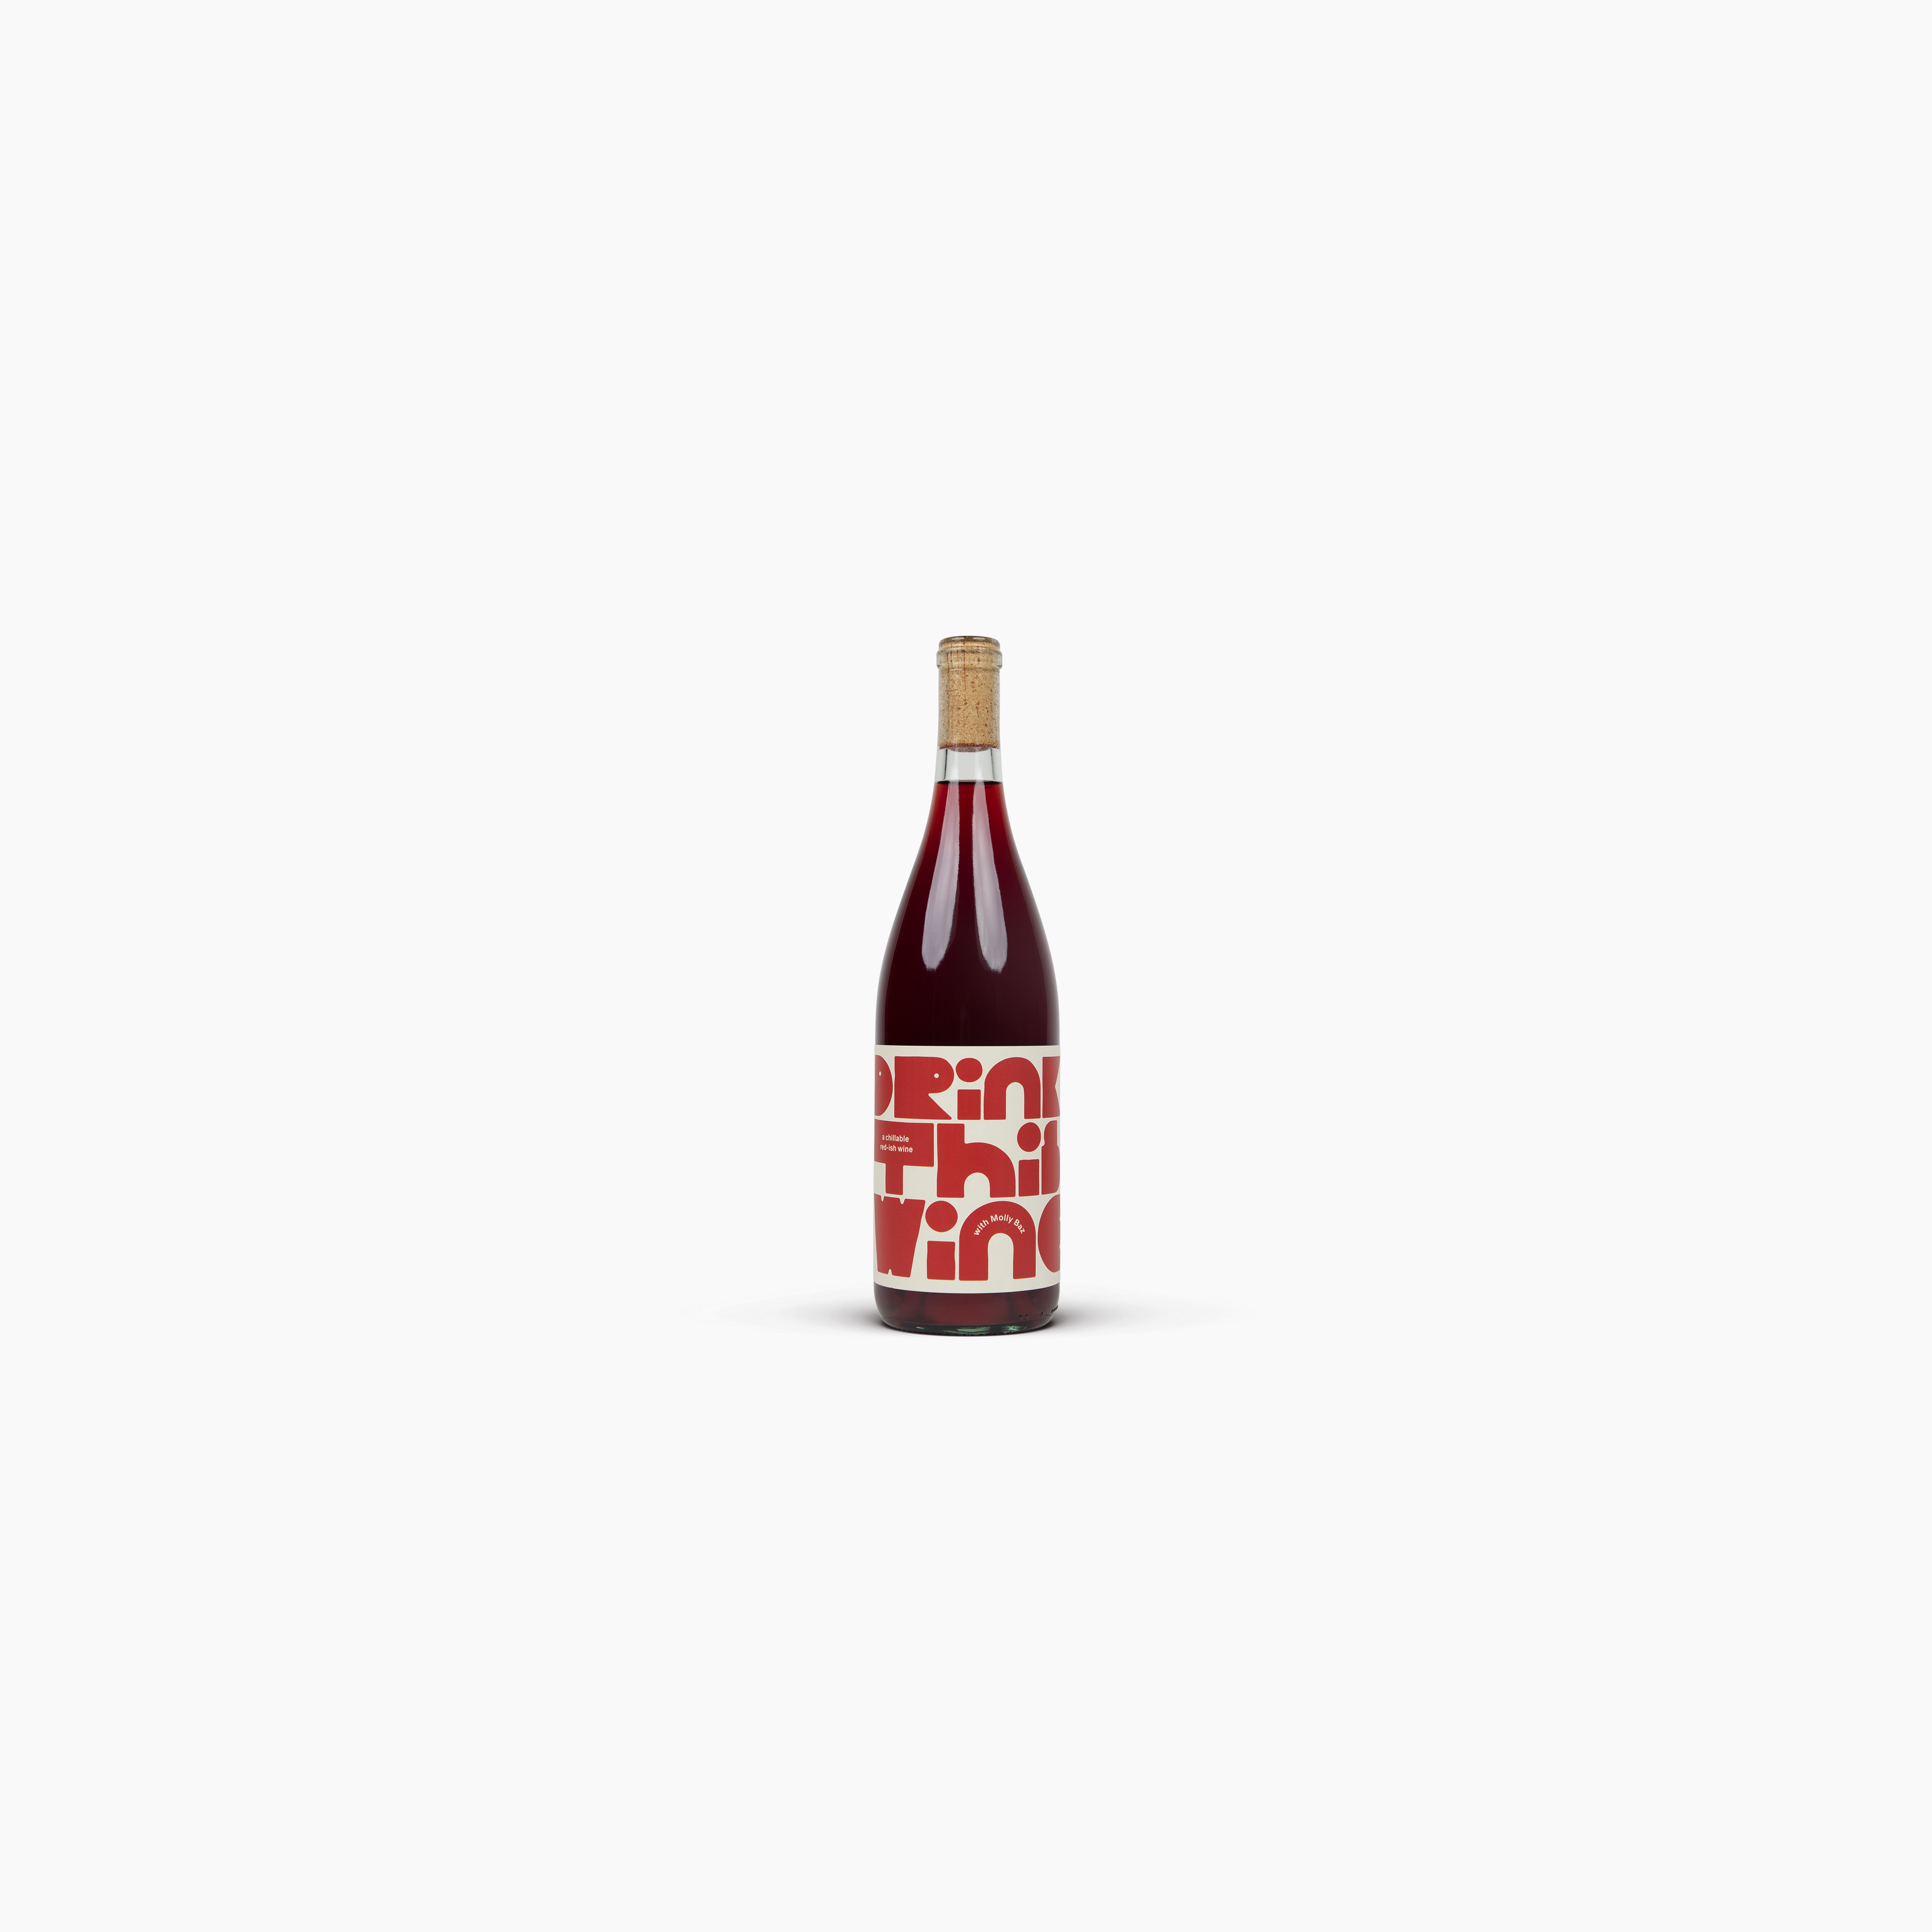 2022 A Chillable Red-Ish Wine